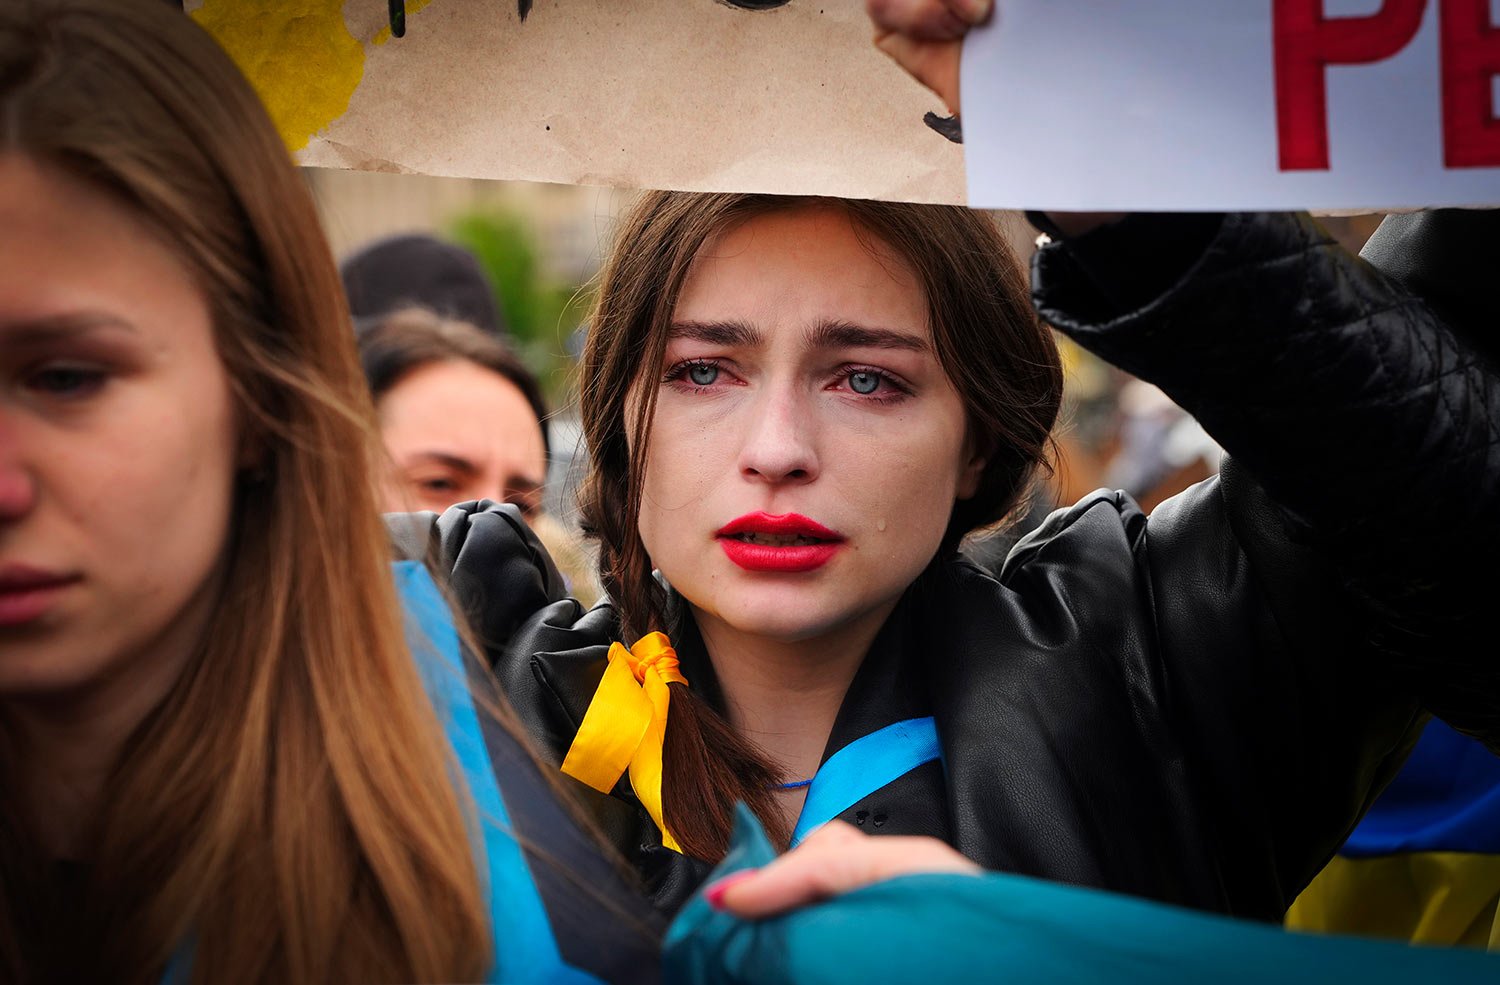  A woman cries as relatives and activists take part in a rally in central Kyiv, Ukraine, Saturday, April 30, 2022, demanding international leaders to organize a humanitarian corridor for evacuation of Ukrainian military and civilians from Mariupol, a